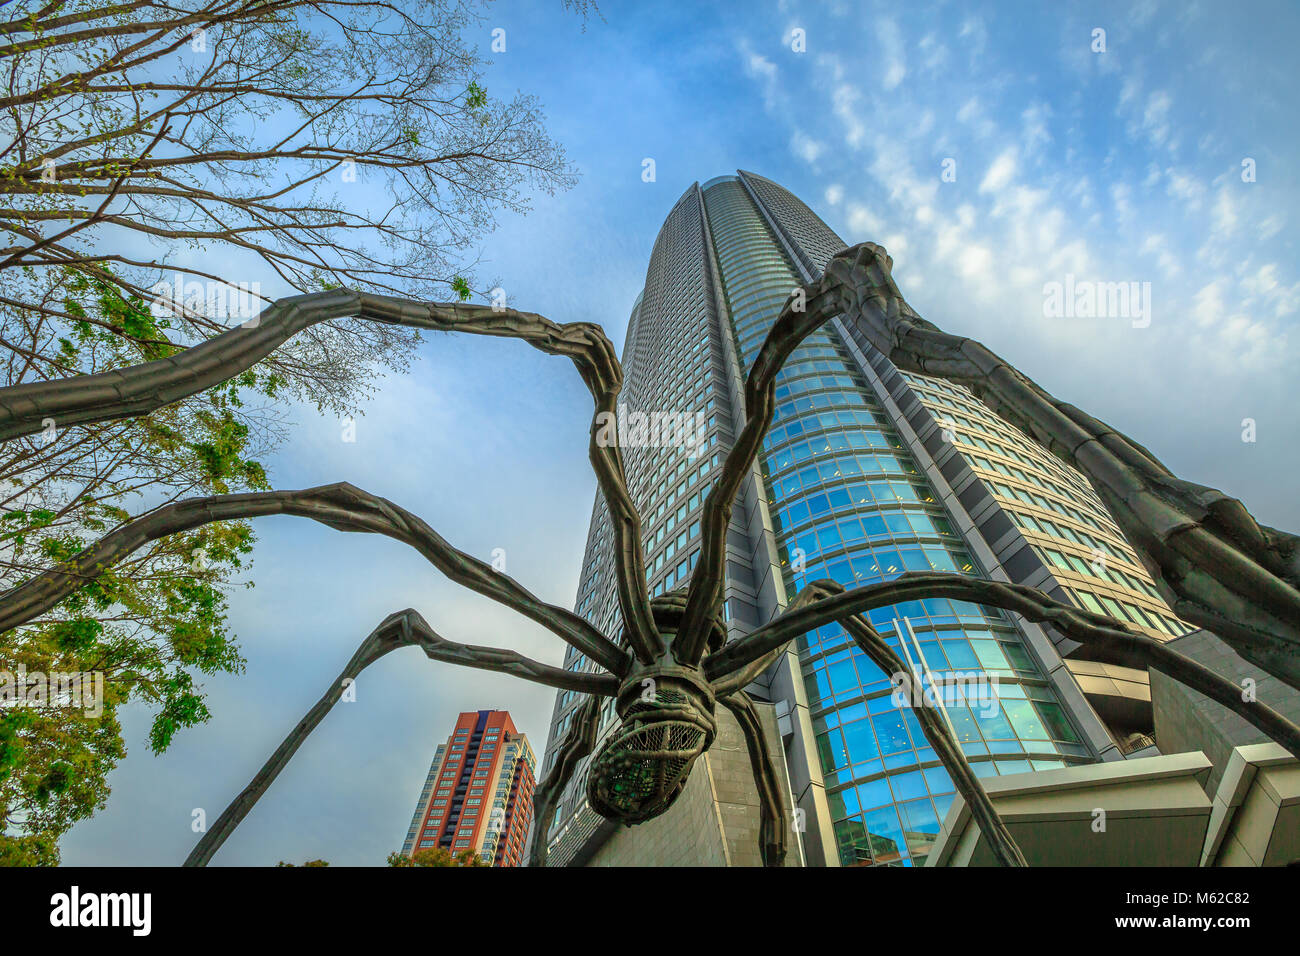 Tokyo, Japan - April 20, 2017: low angle view of Mori Tower and Maman Spider bronze sculpture inside Roppongi Hills complex in Minato District, Tokyo at sunset. Stock Photo